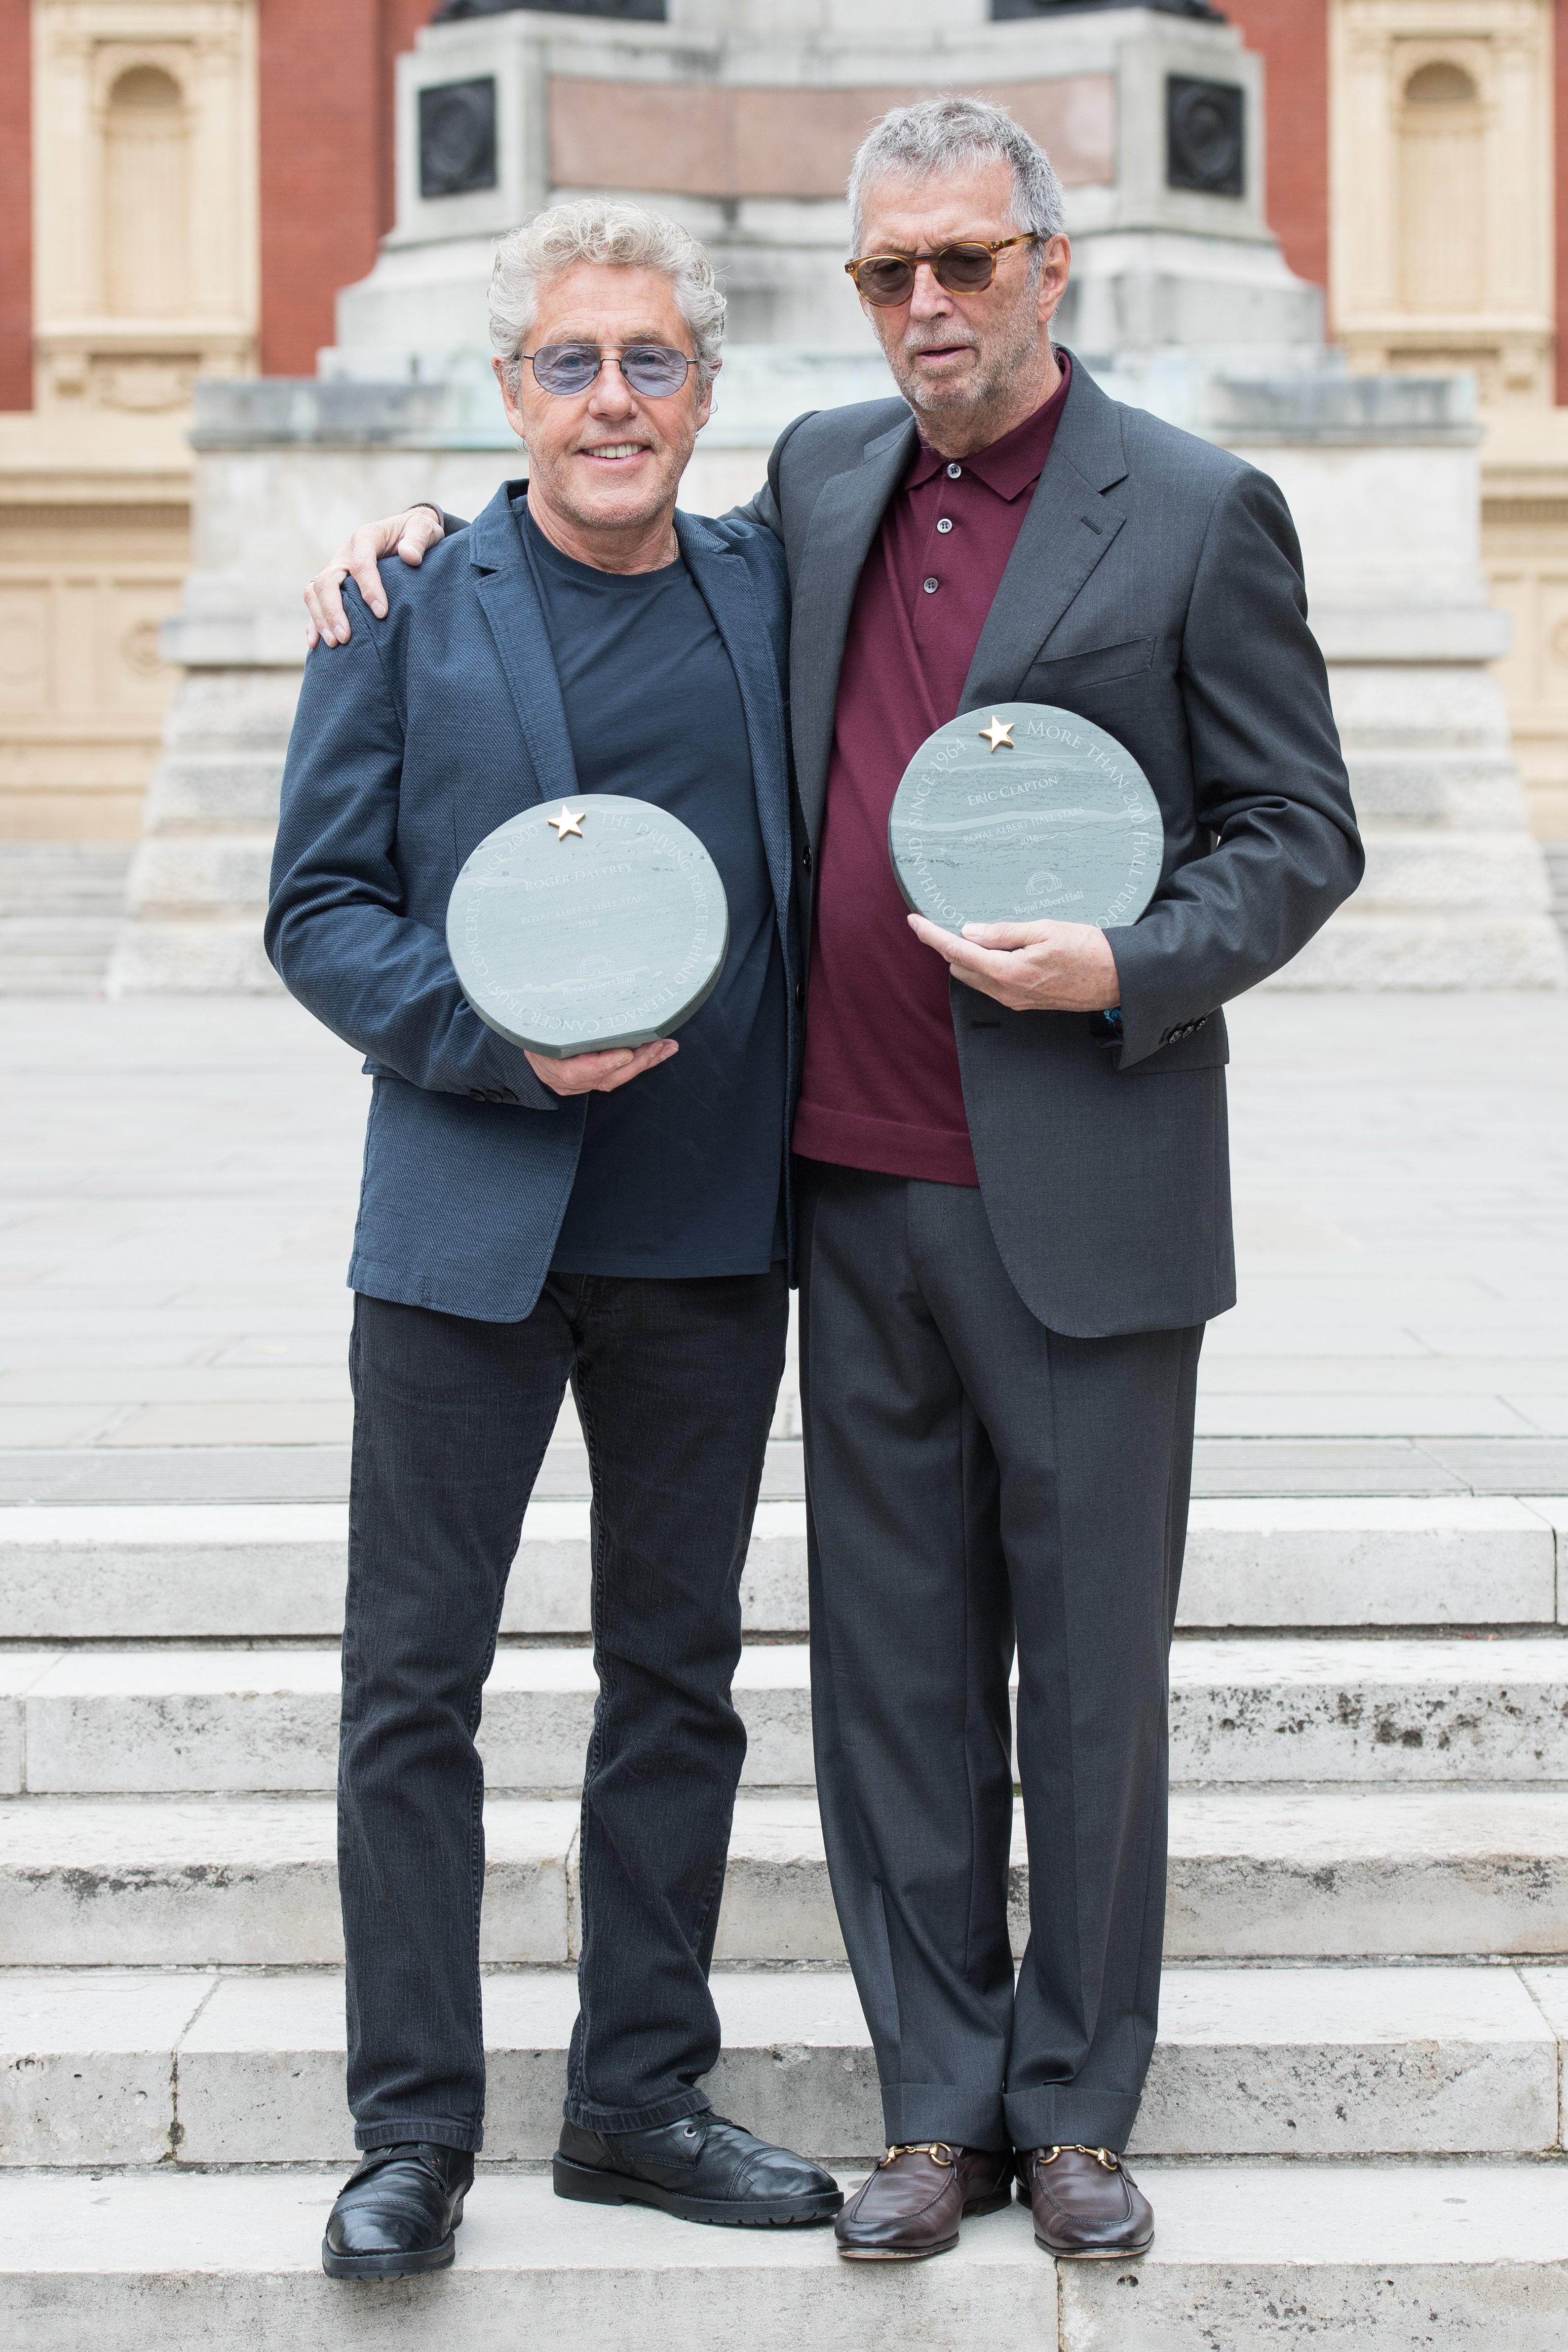 Roger Daltrey and Eric Clapton at the launch of the "Walk Of Fame" on September 4, 2018, in London, England | Source: Getty Images